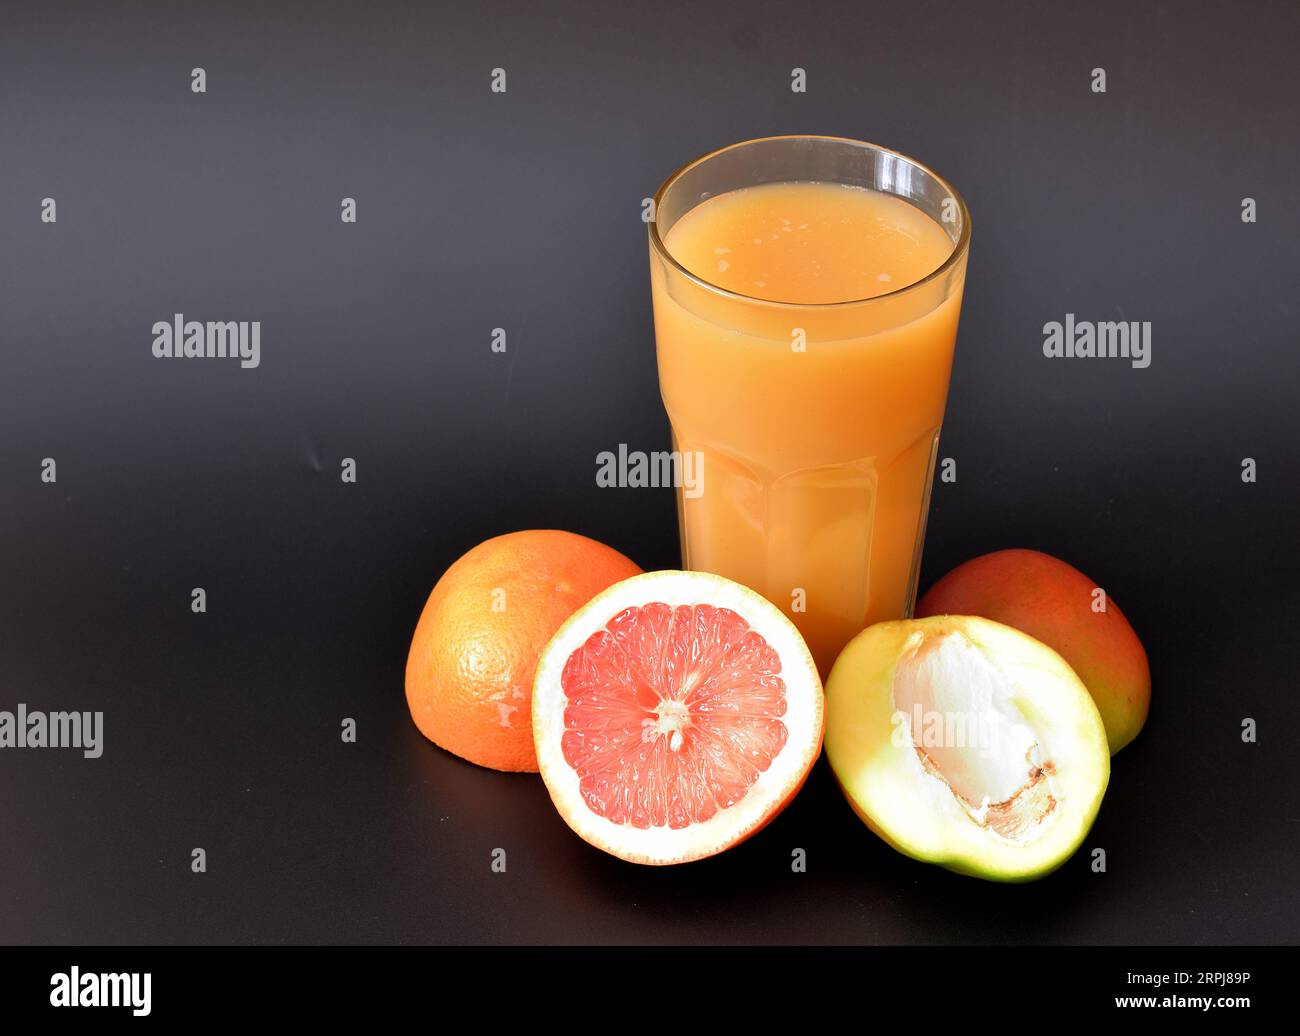 A glass of fruit juice on a black background, next to the halves of a ripe grapefruit and mango. Close-up. Stock Photo